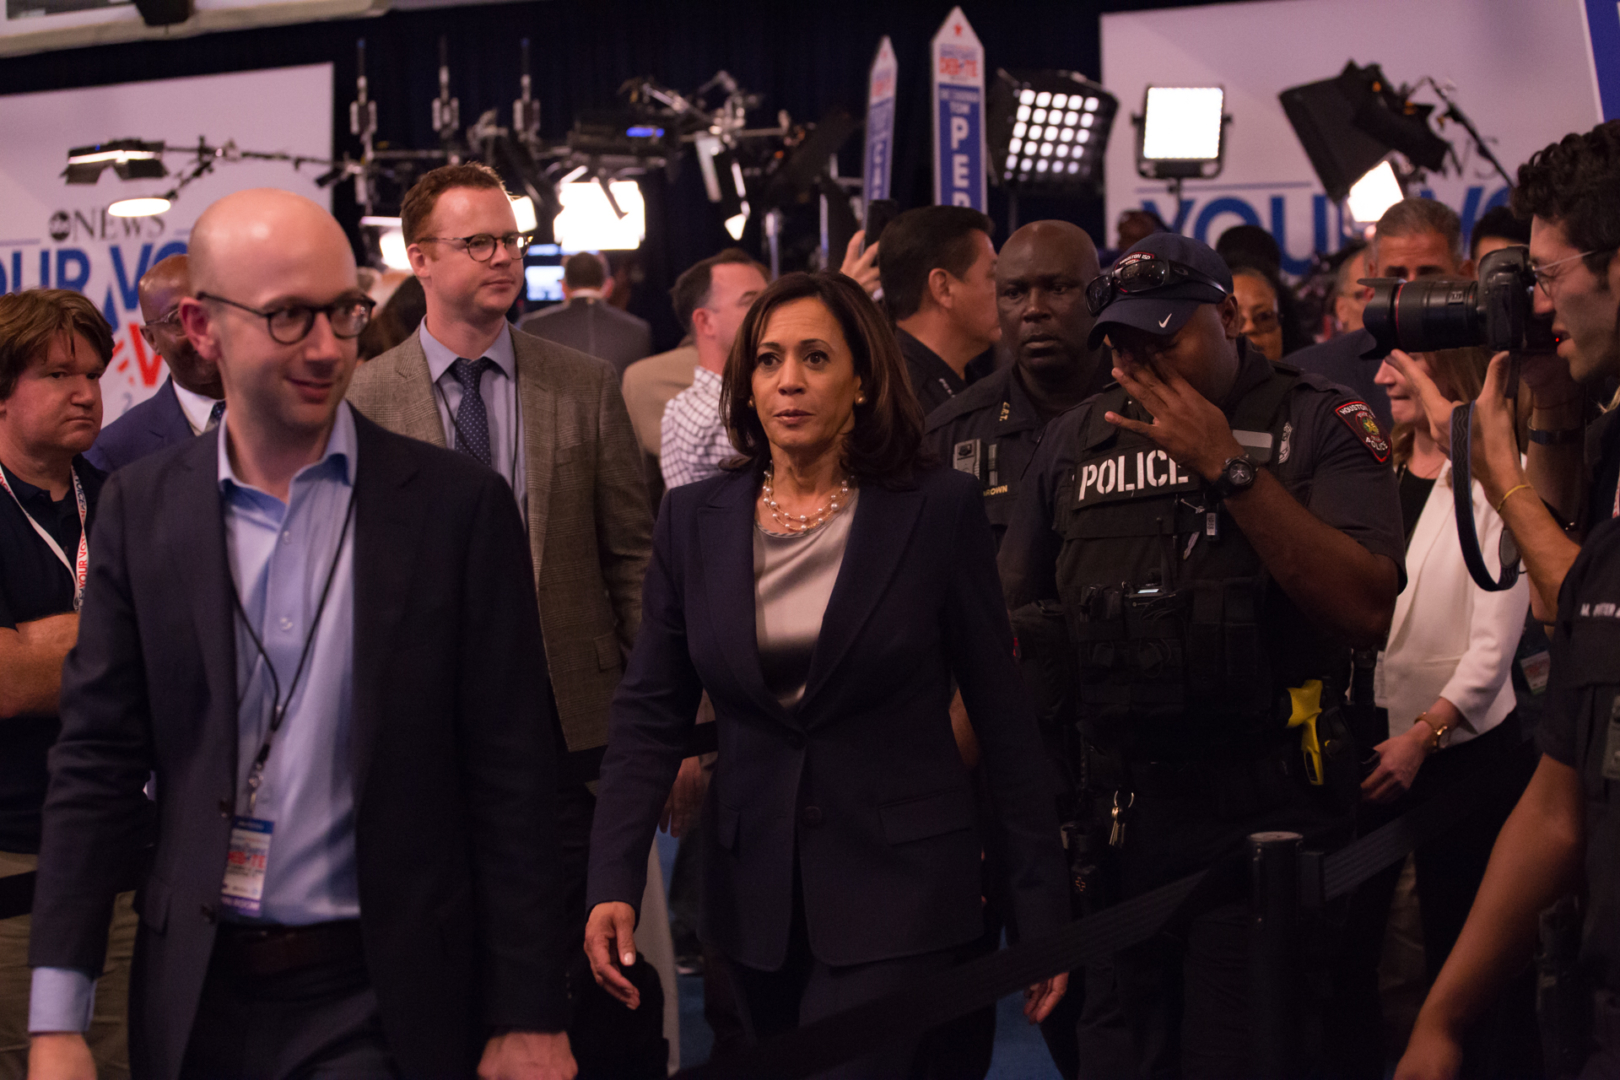 Democratic vice presidential candidate Kamala Harris is visiting UH as part of her Texas campaign trip. | Trevor Nolley/The Cougar